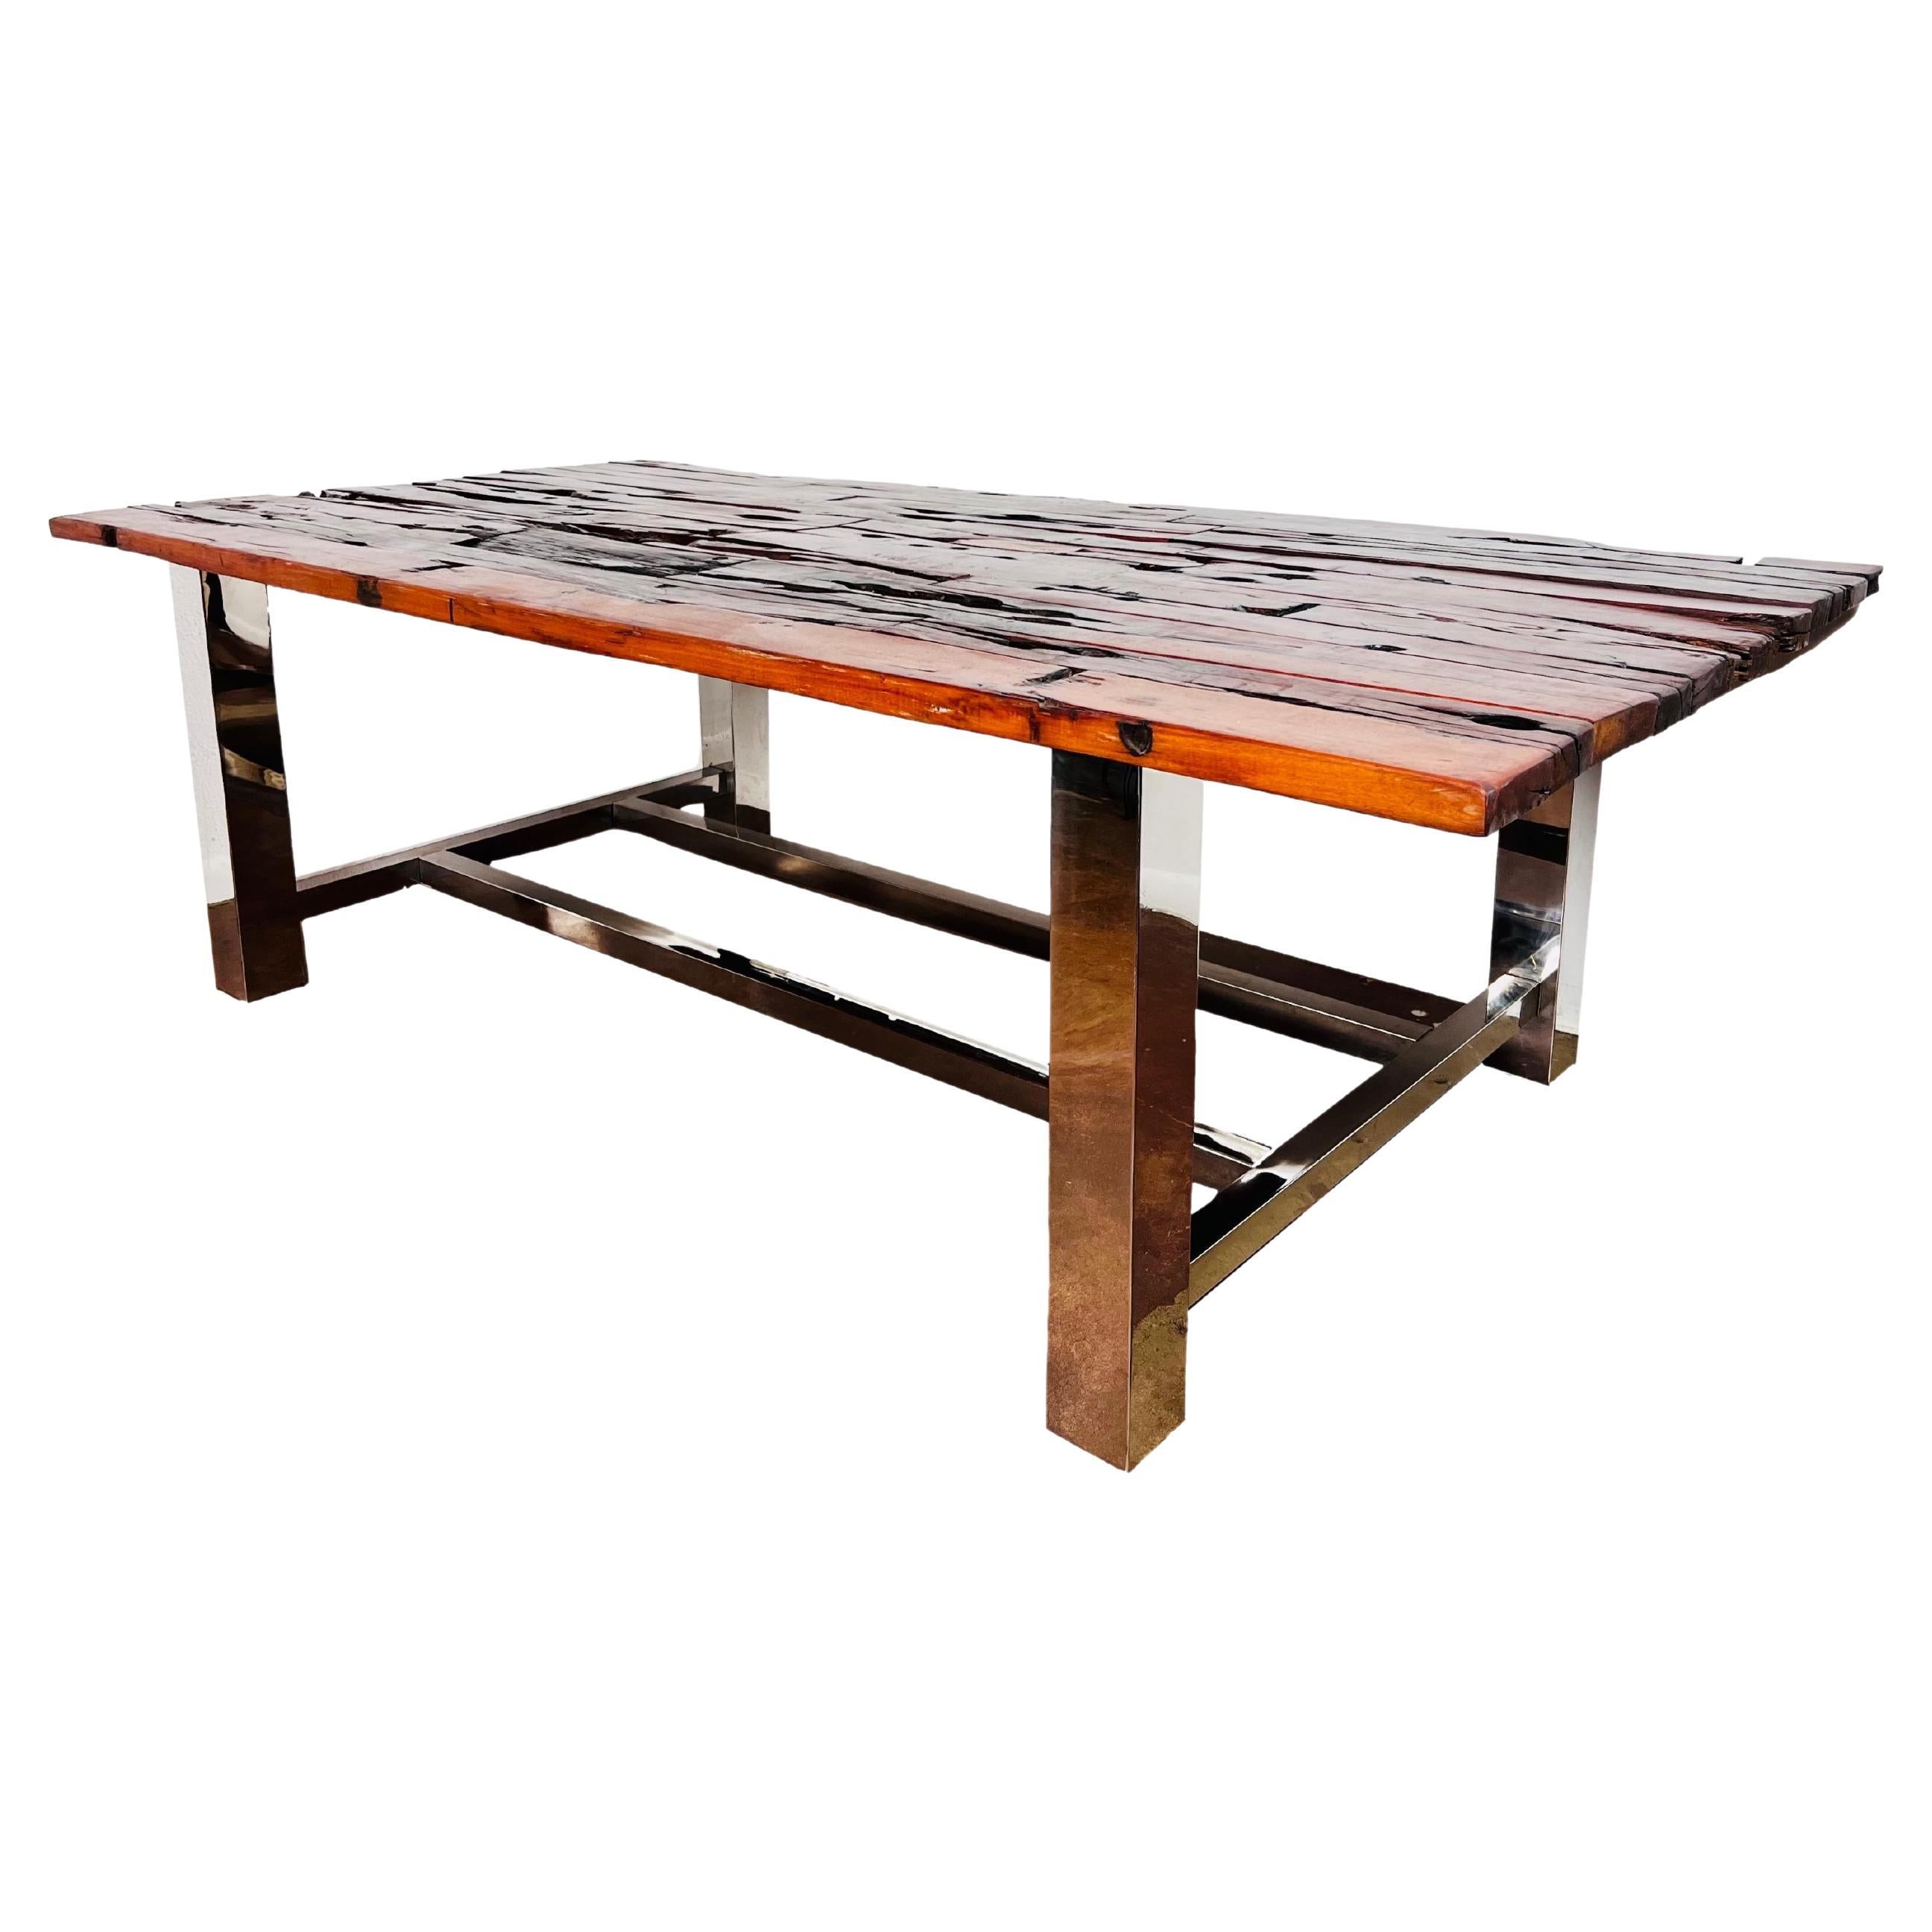 What is the best product to use on wood furniture?